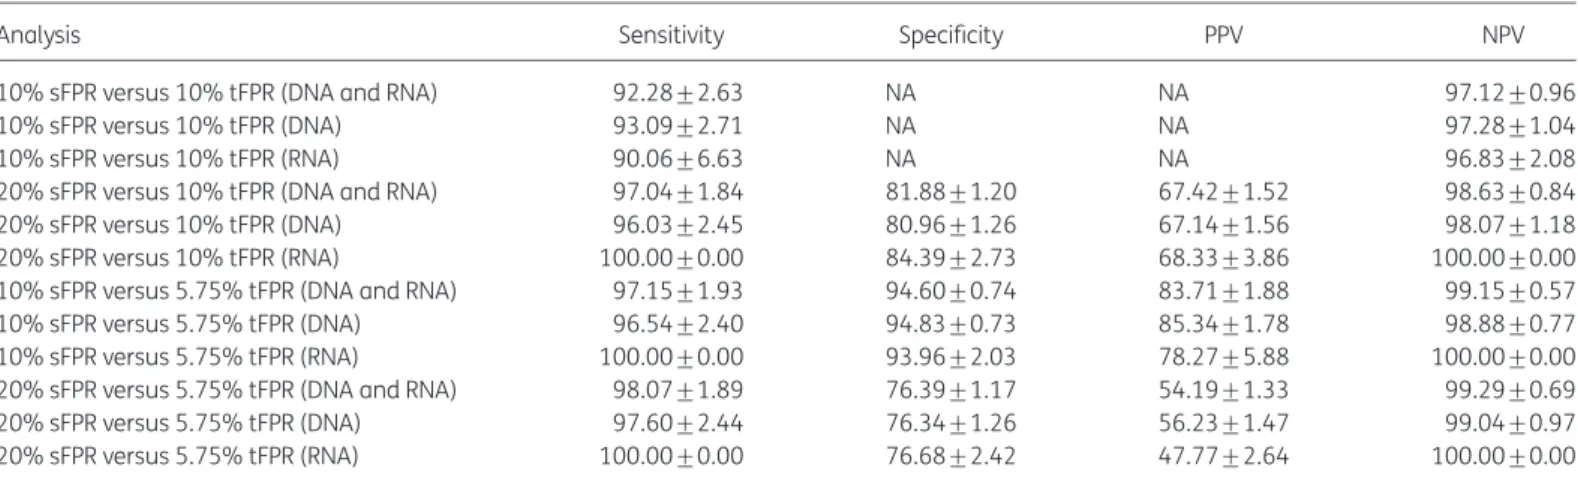 Table 4. Sensitivity, specificity, positive predictive value (PPV) and negative predictive value (NPV) for the detection of X4/DM virus based on 10% and 20% FPR single testing (10% sFPR and 20% sFPR, respectively) versus the gold standard 10% and 5.75% tri